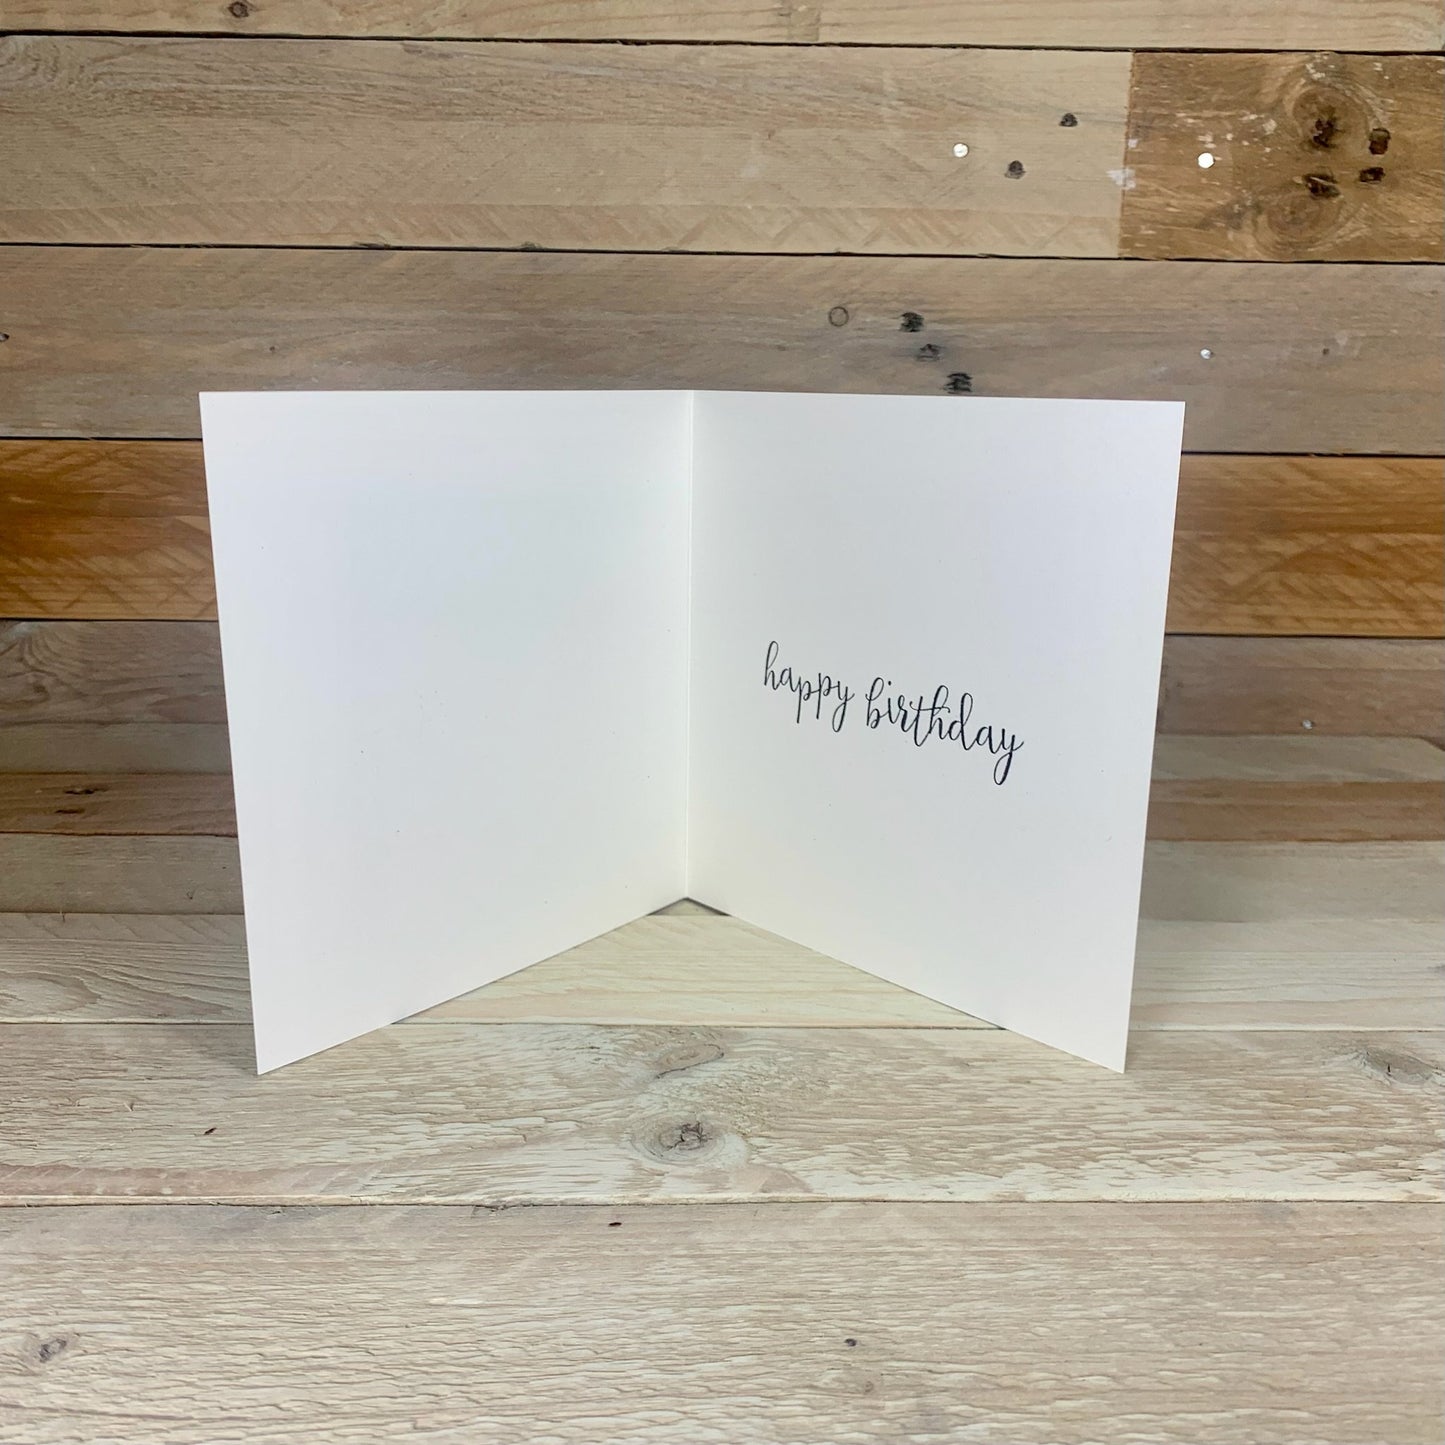 Droplet the Lamb Birthday Card - Arty Bee Designs 